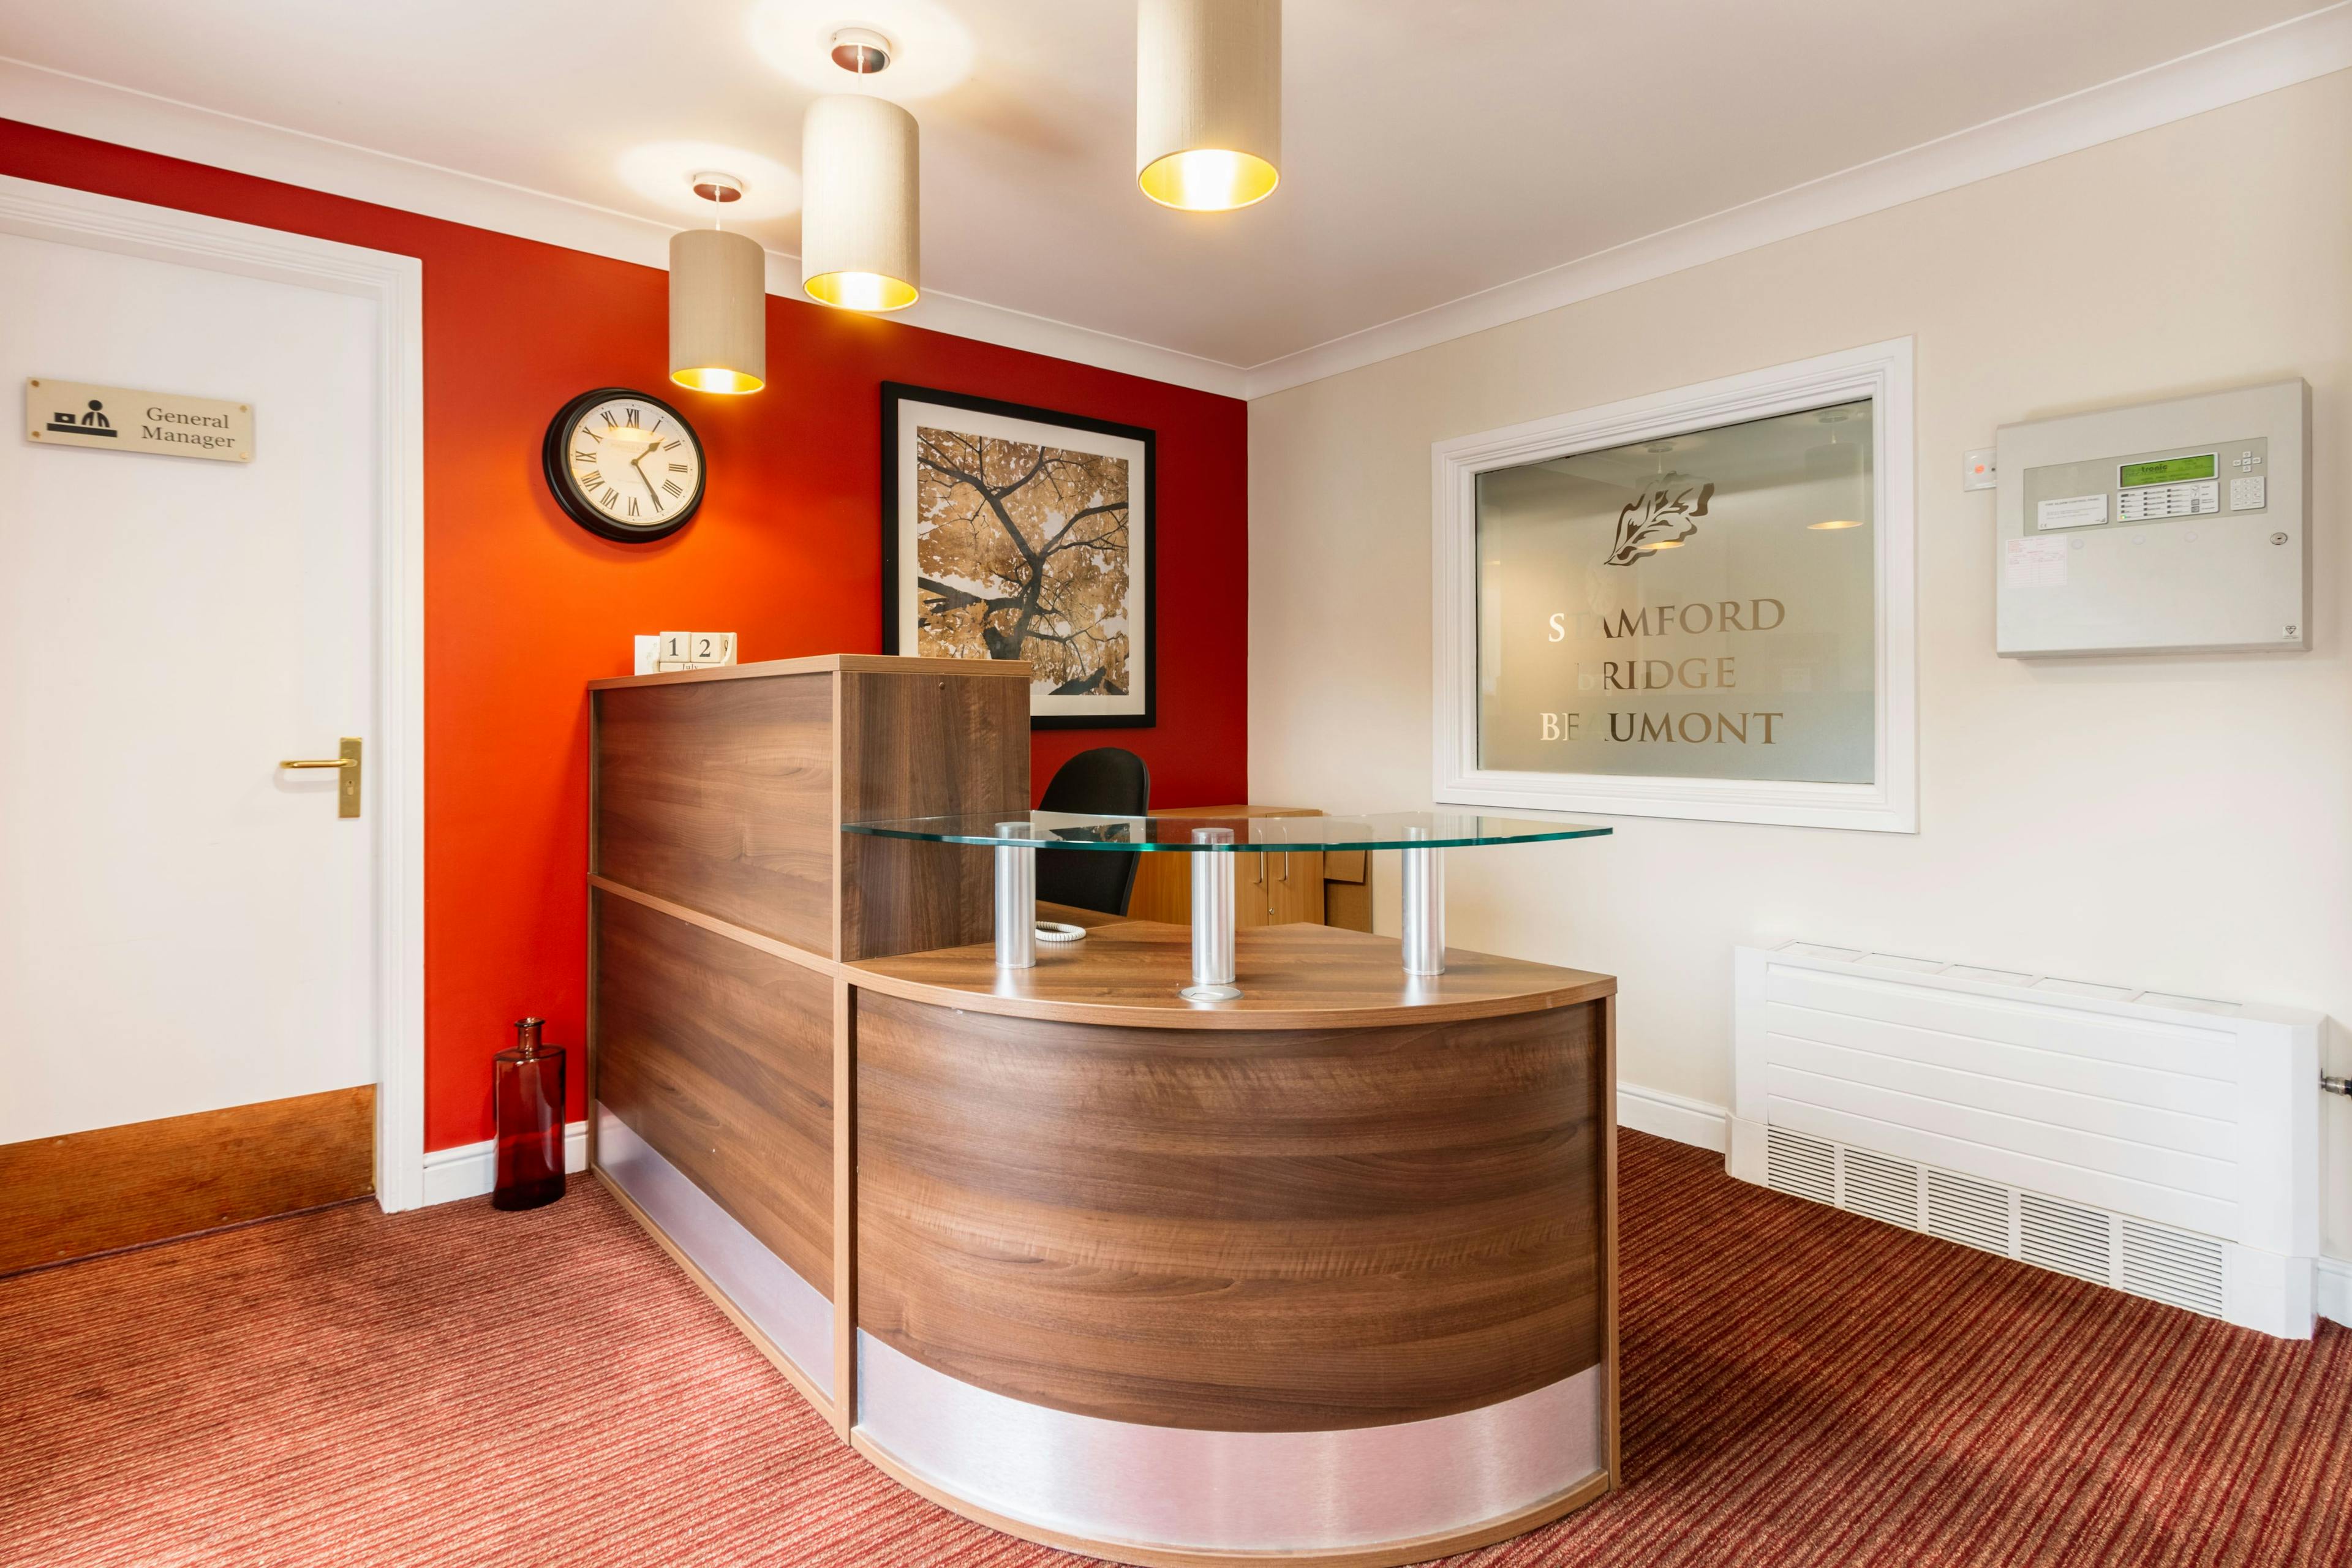 Reception at Stamford Bridge Beaumont Care Home in York, North Yorkshire